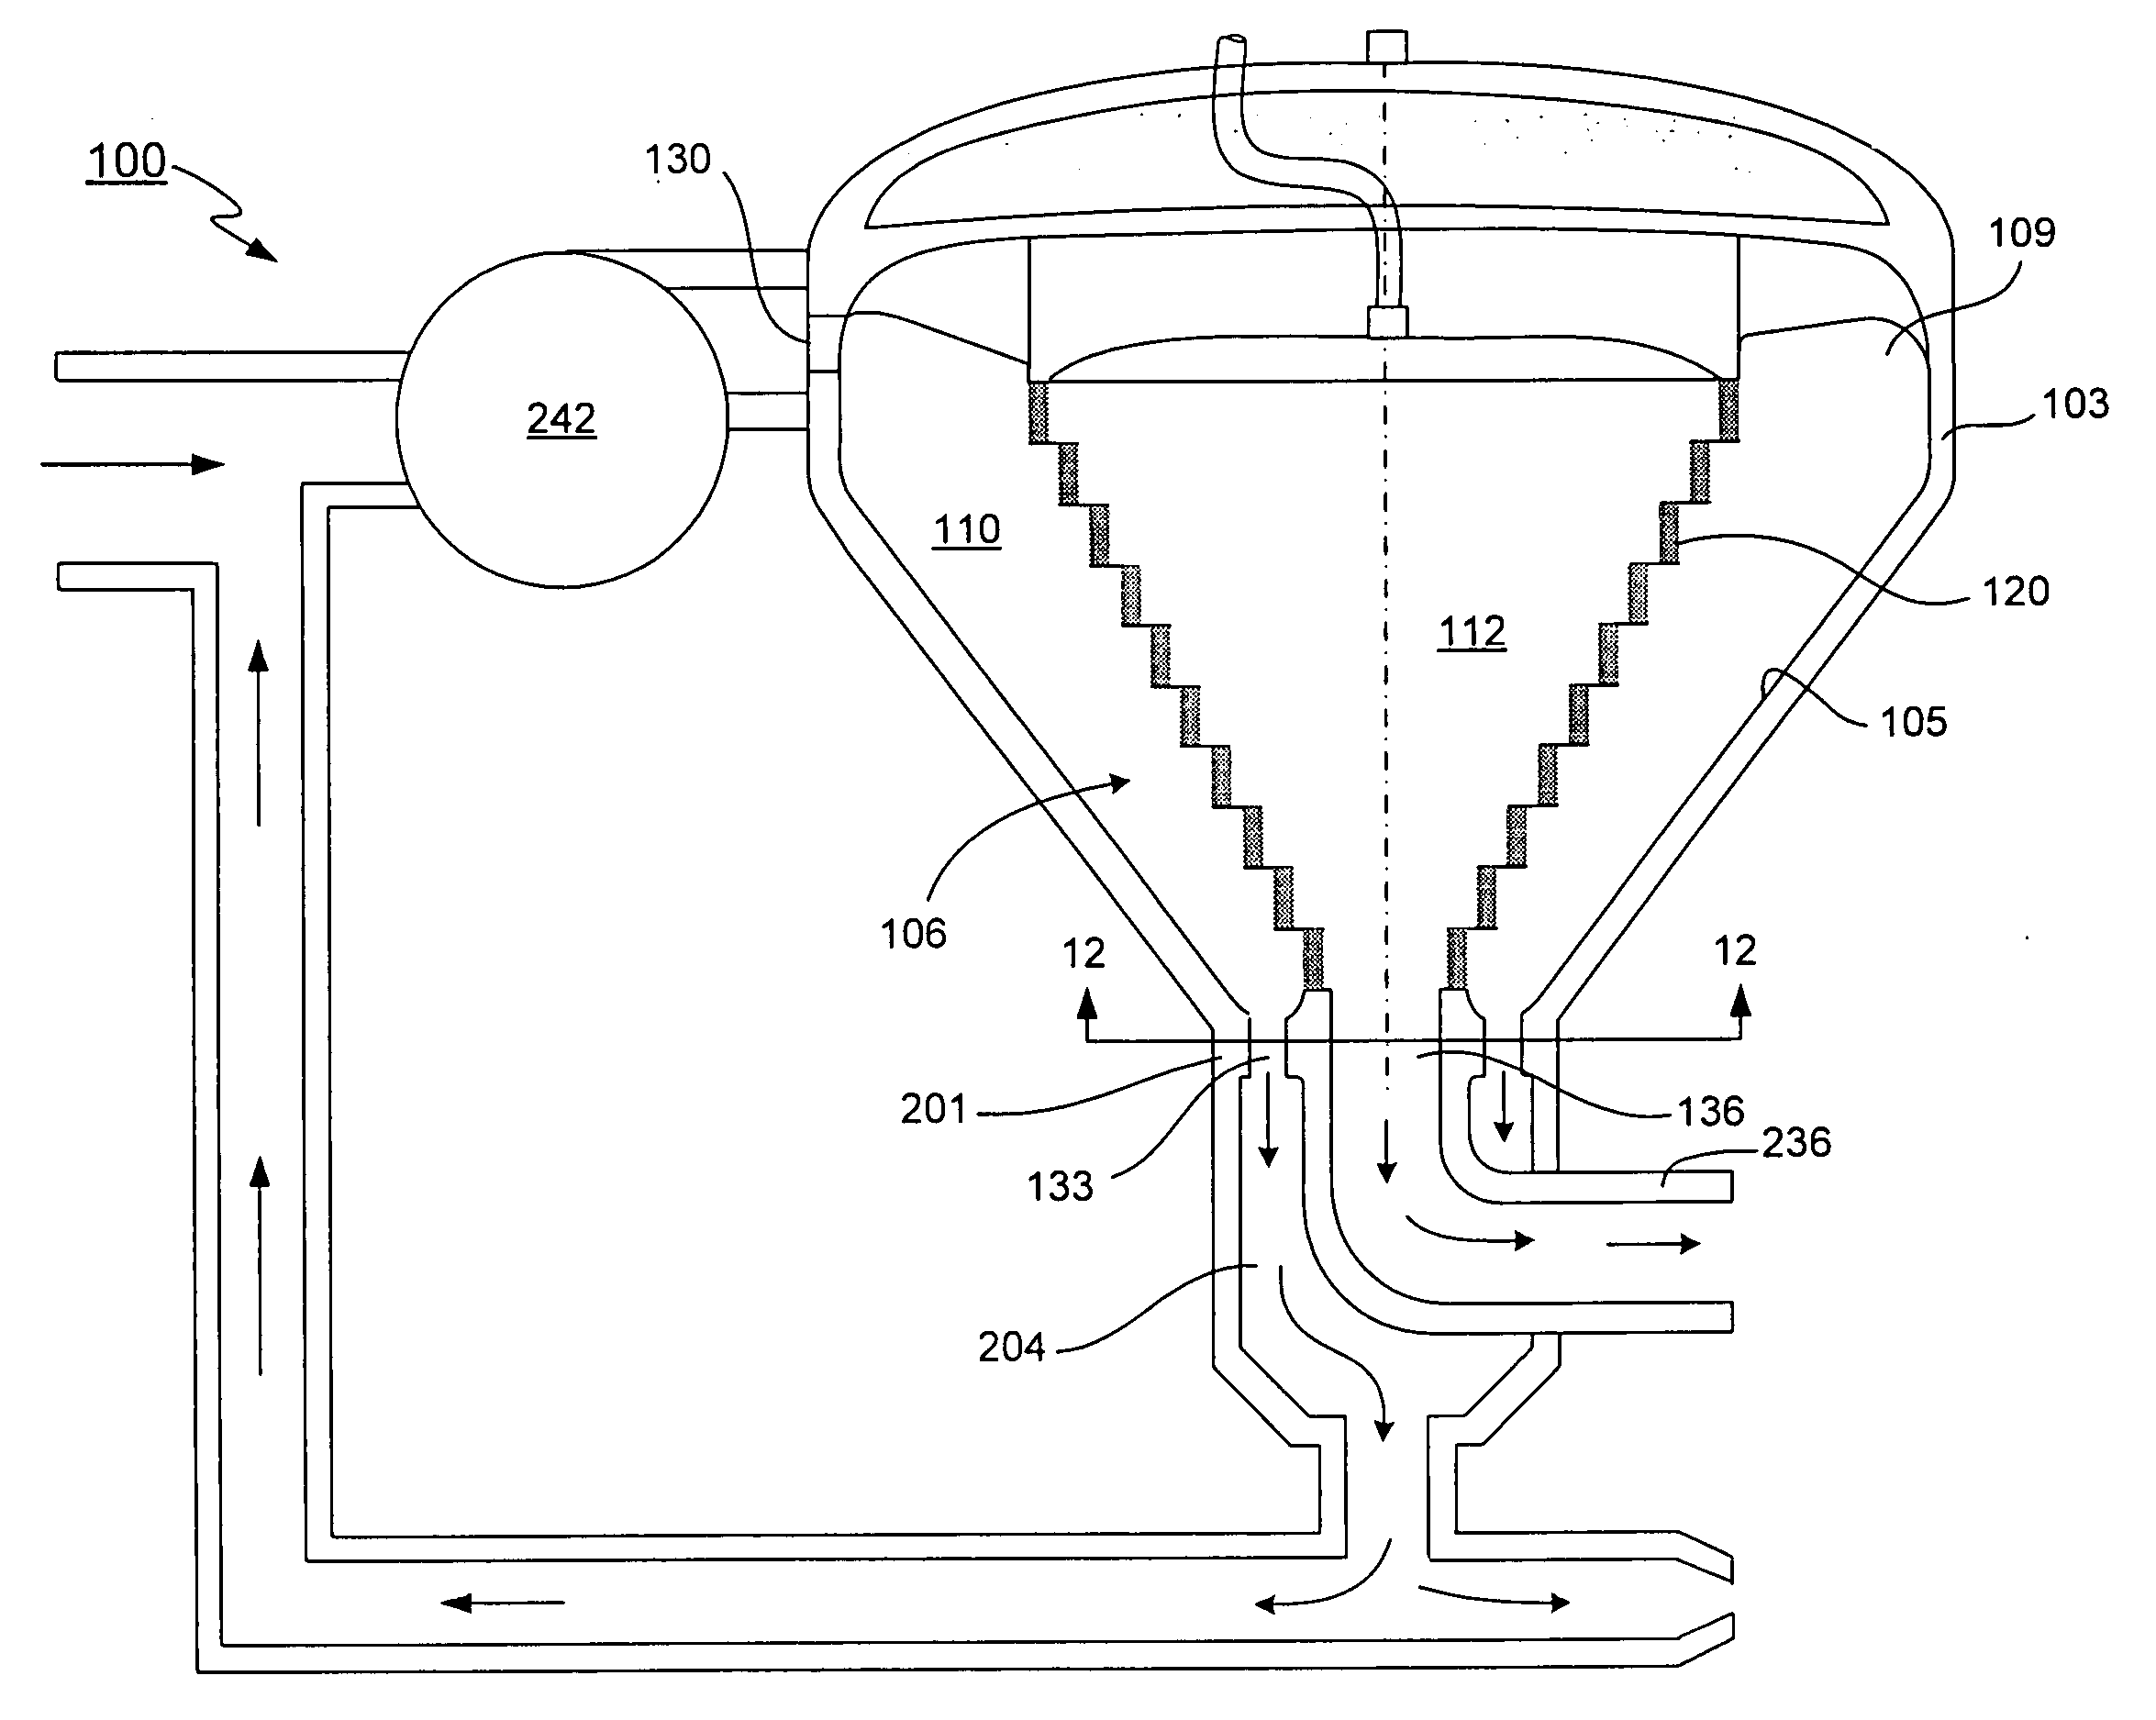 Hydroclone based fluid filtration system